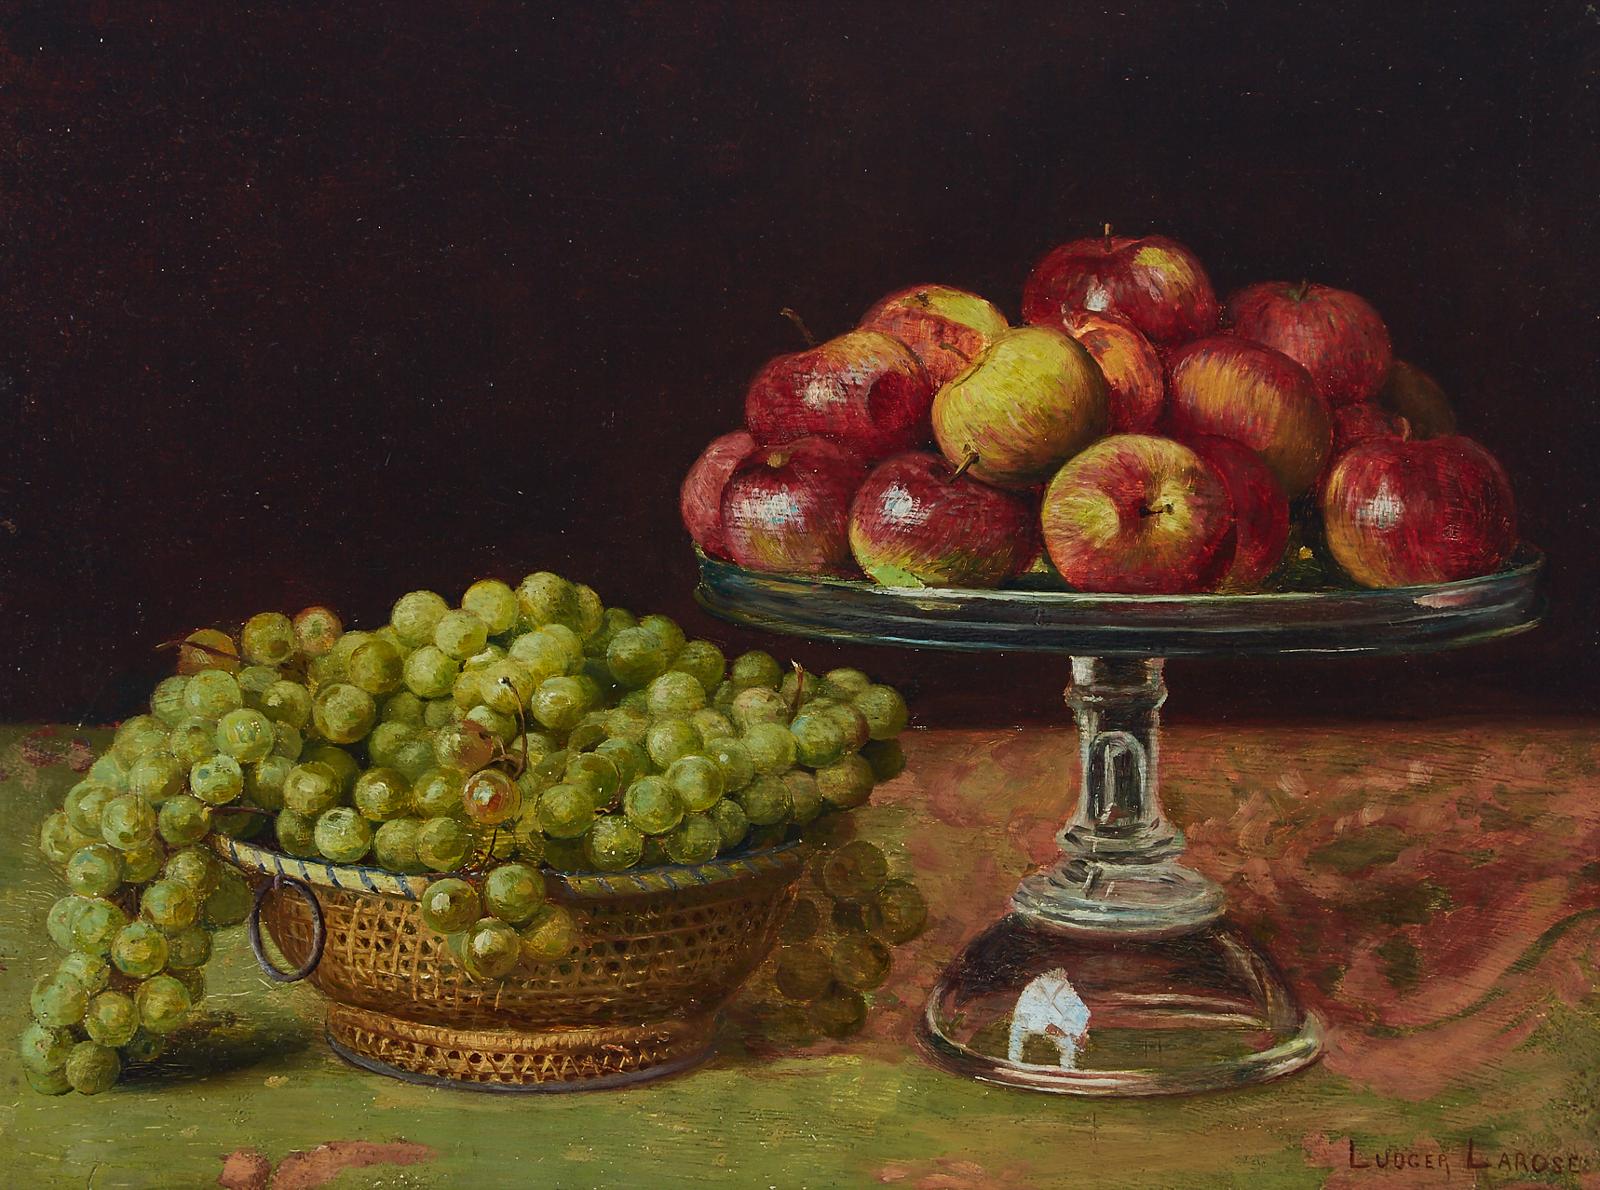 Ludger Larose (1865-1915) - Still Life With Grapes And Apples